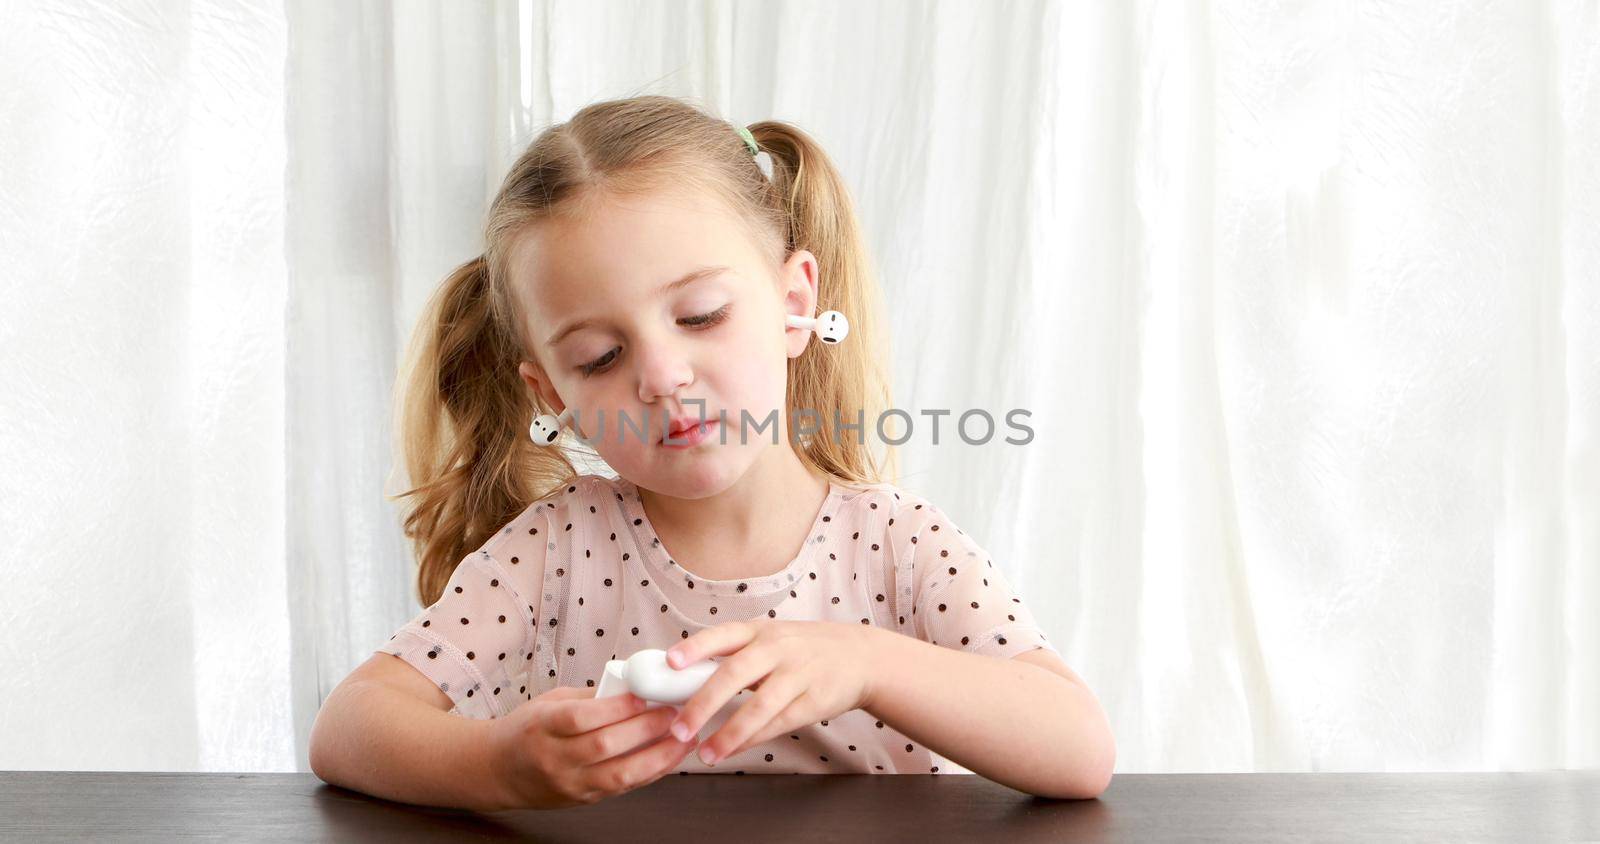 Cute little girl with true wireless earbuds inserted into ears in wrong manner playing with charging case at table